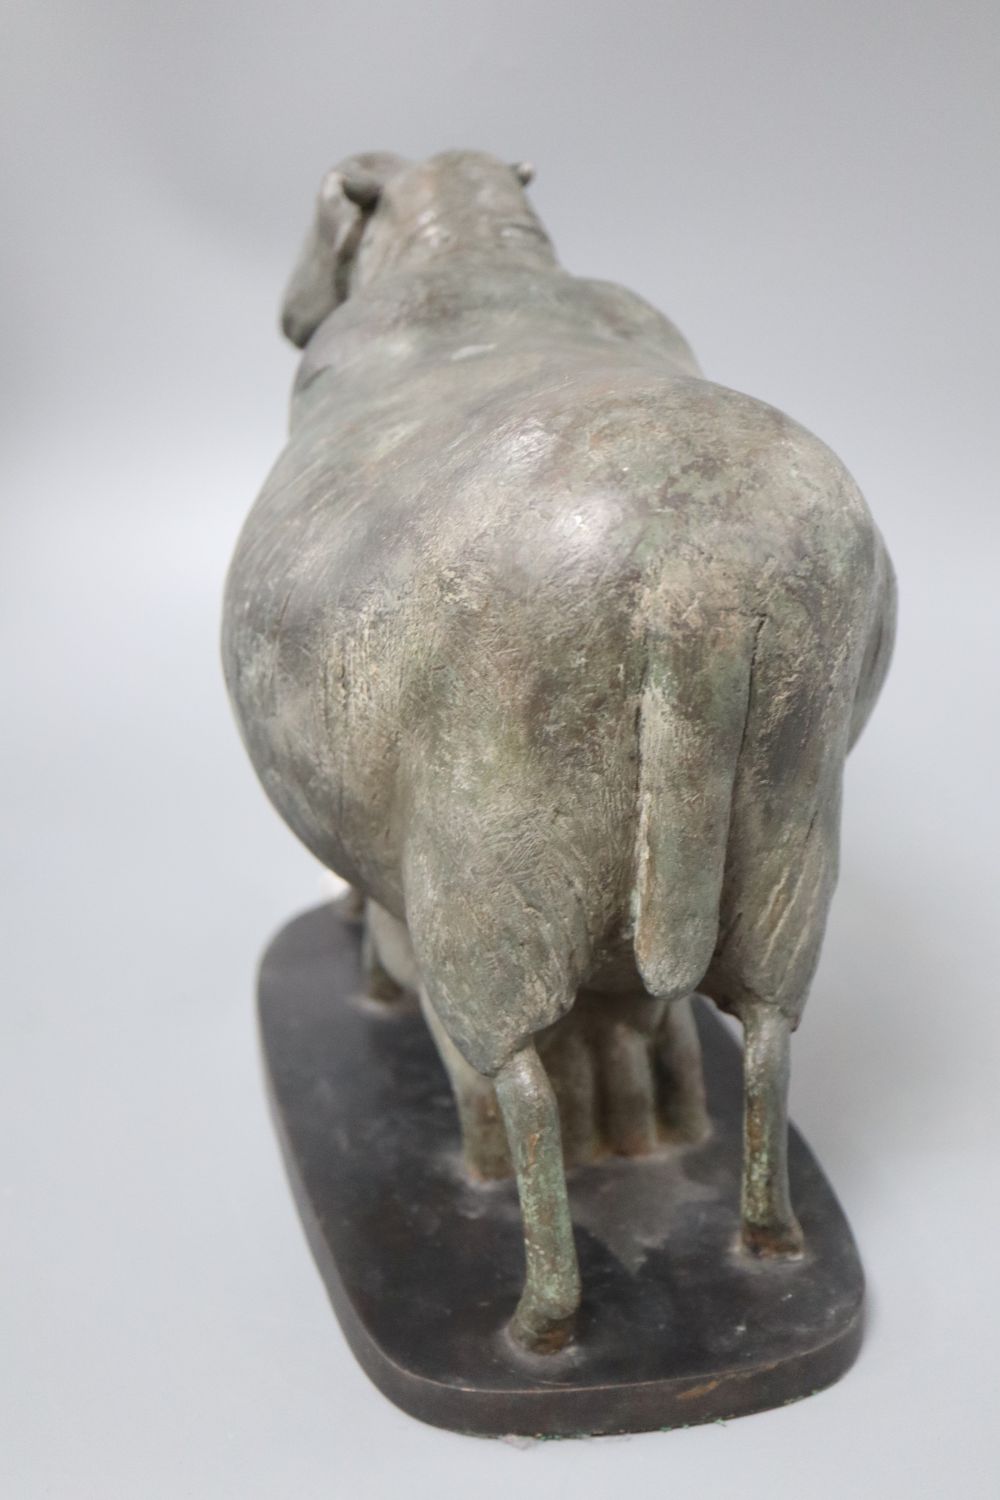 Attributed to Geraldine Knight (1933-2008), bronze, Ewe and lamb unsigned, paper label numbered 1/10, height 27cm